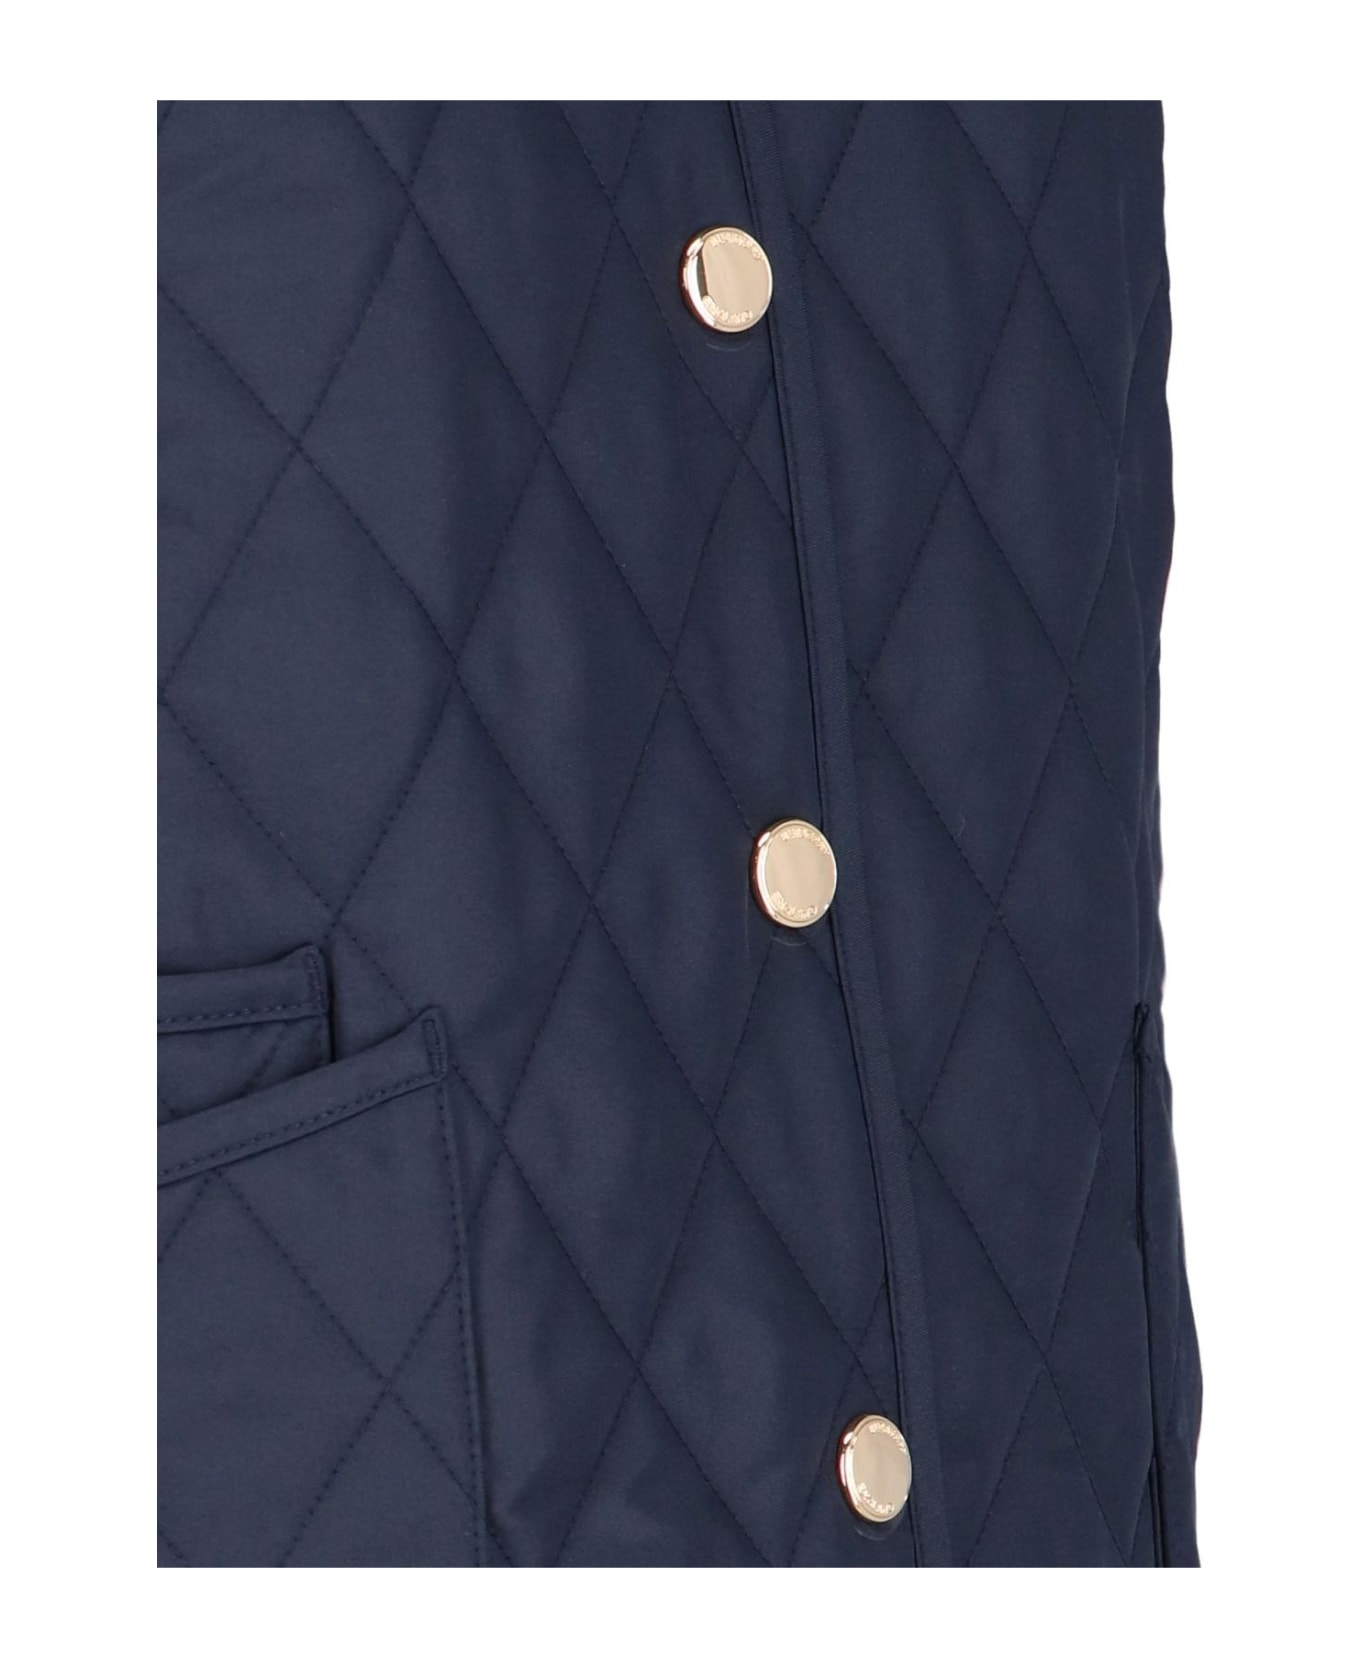 Burberry Quilted Jacket - Blue